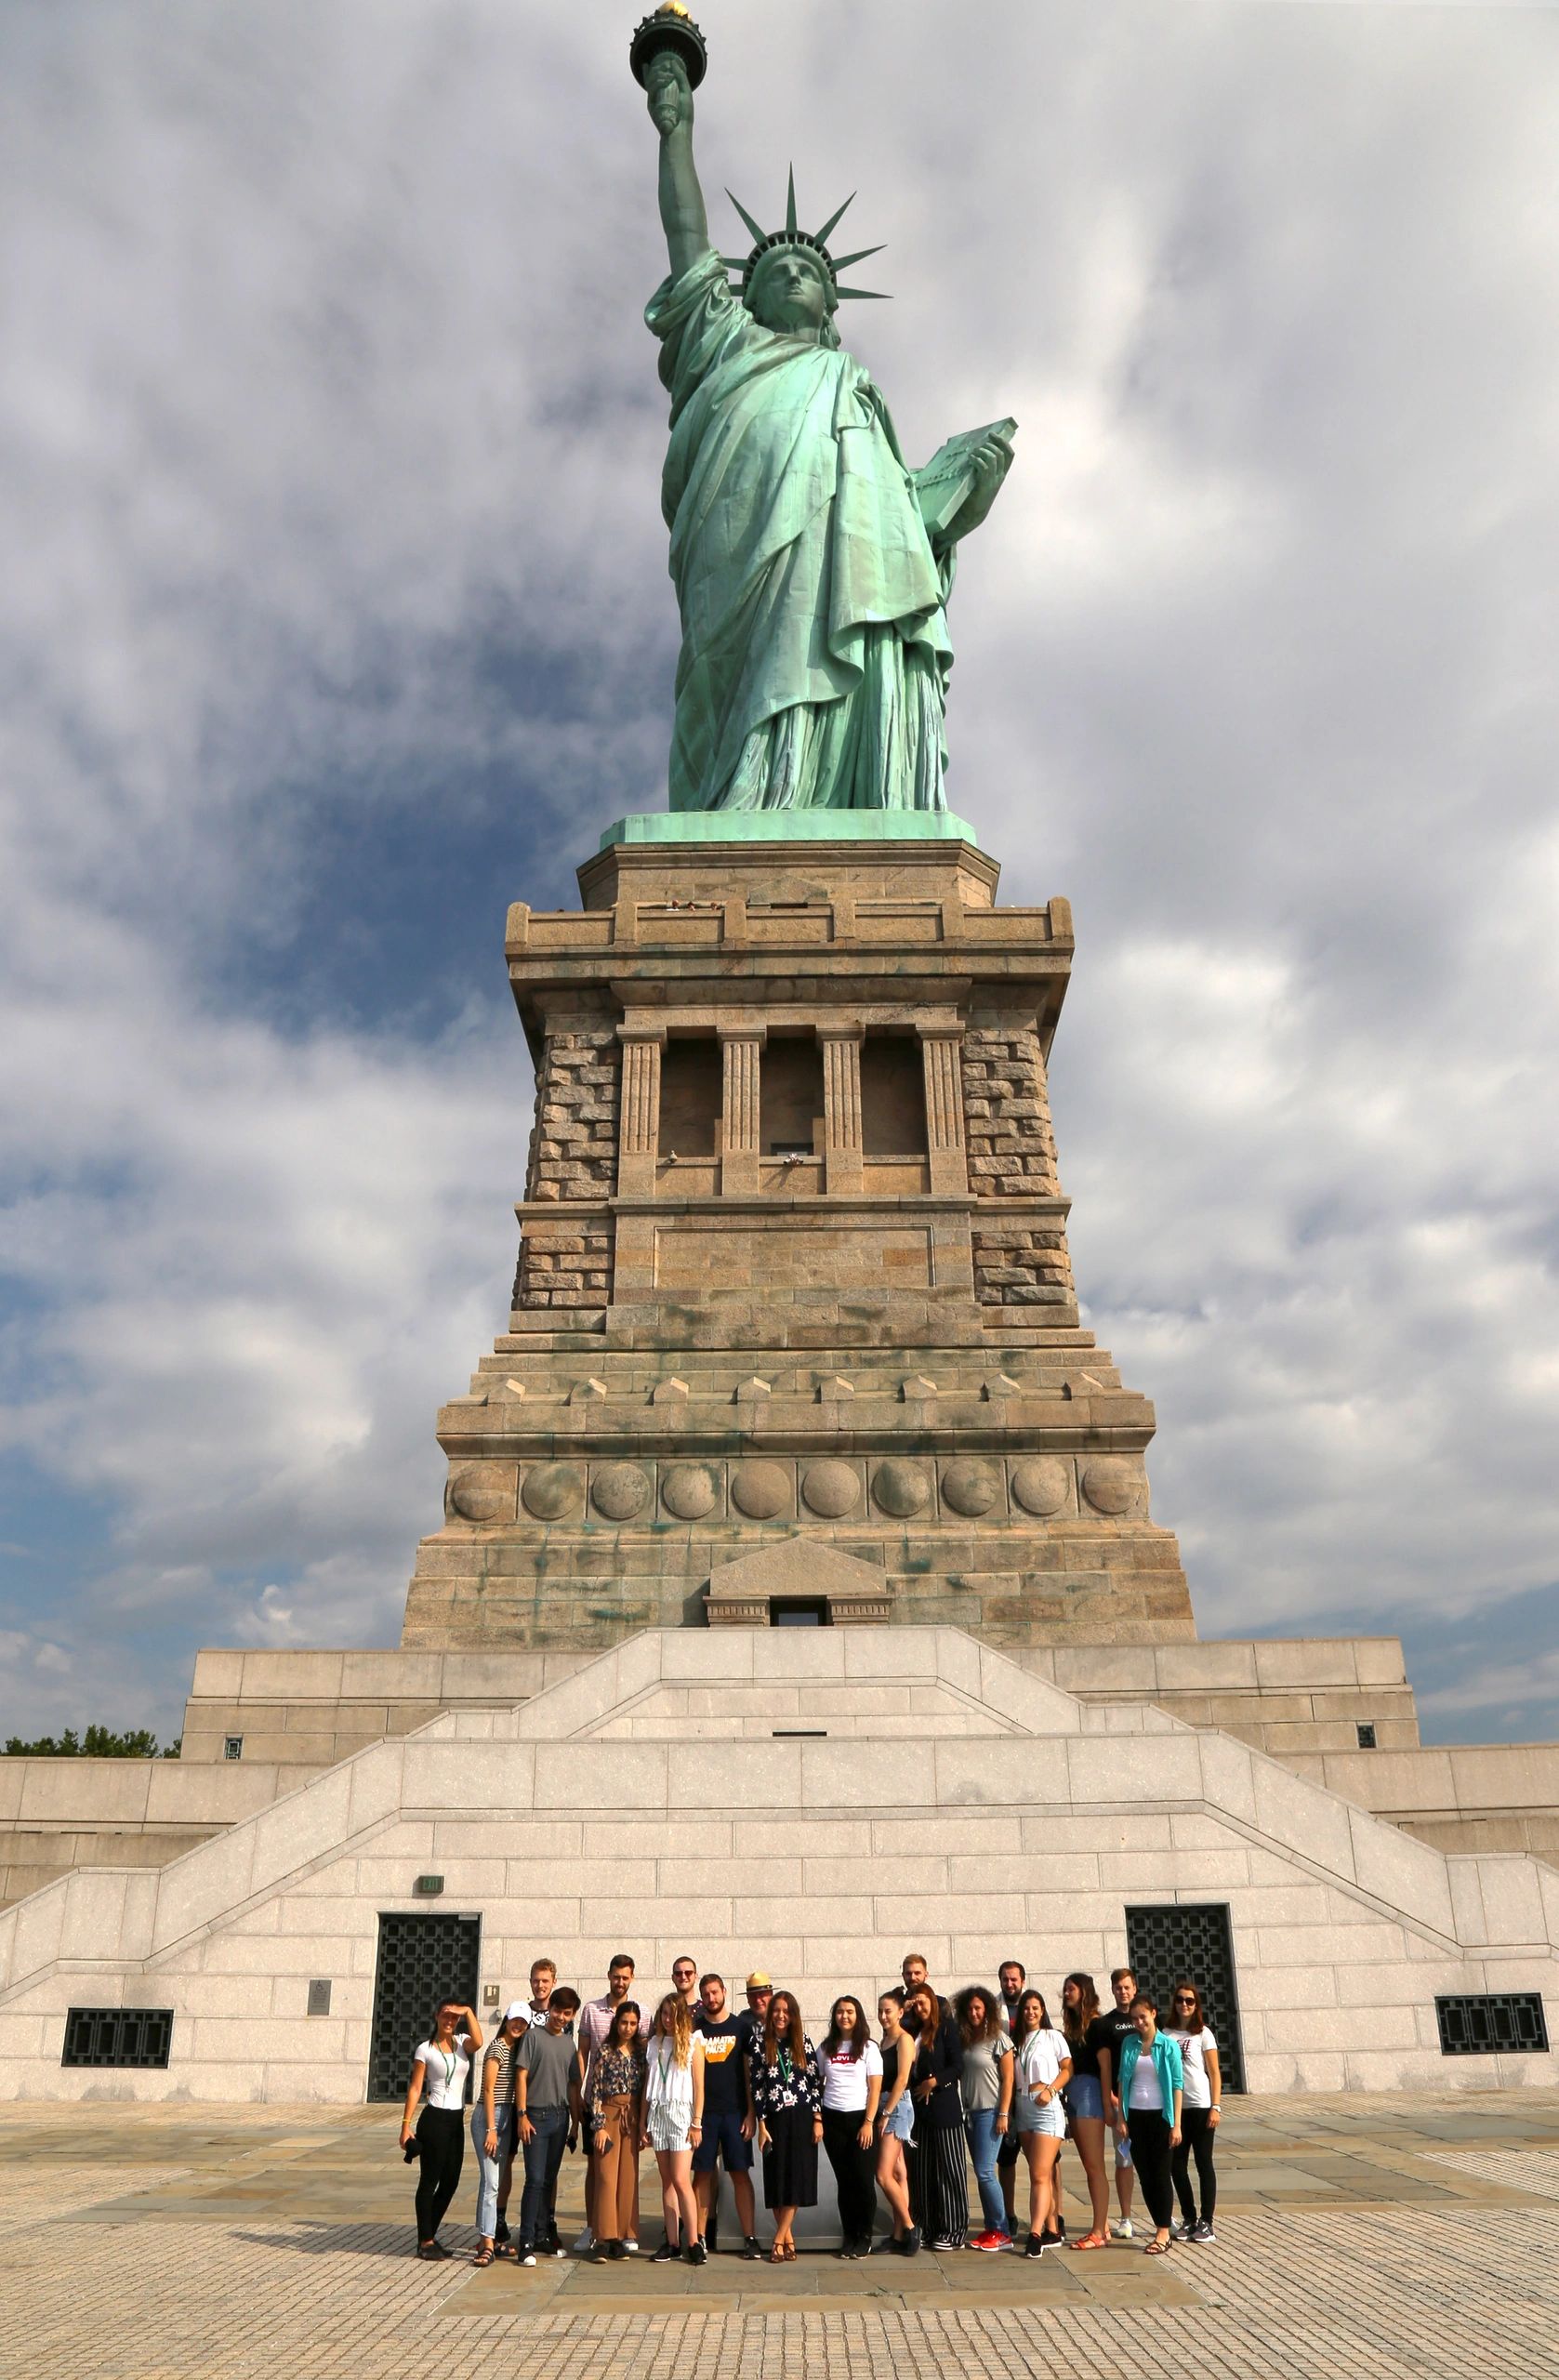 A tour to the Crown of the Statue of Liberty was organized for our employees. 